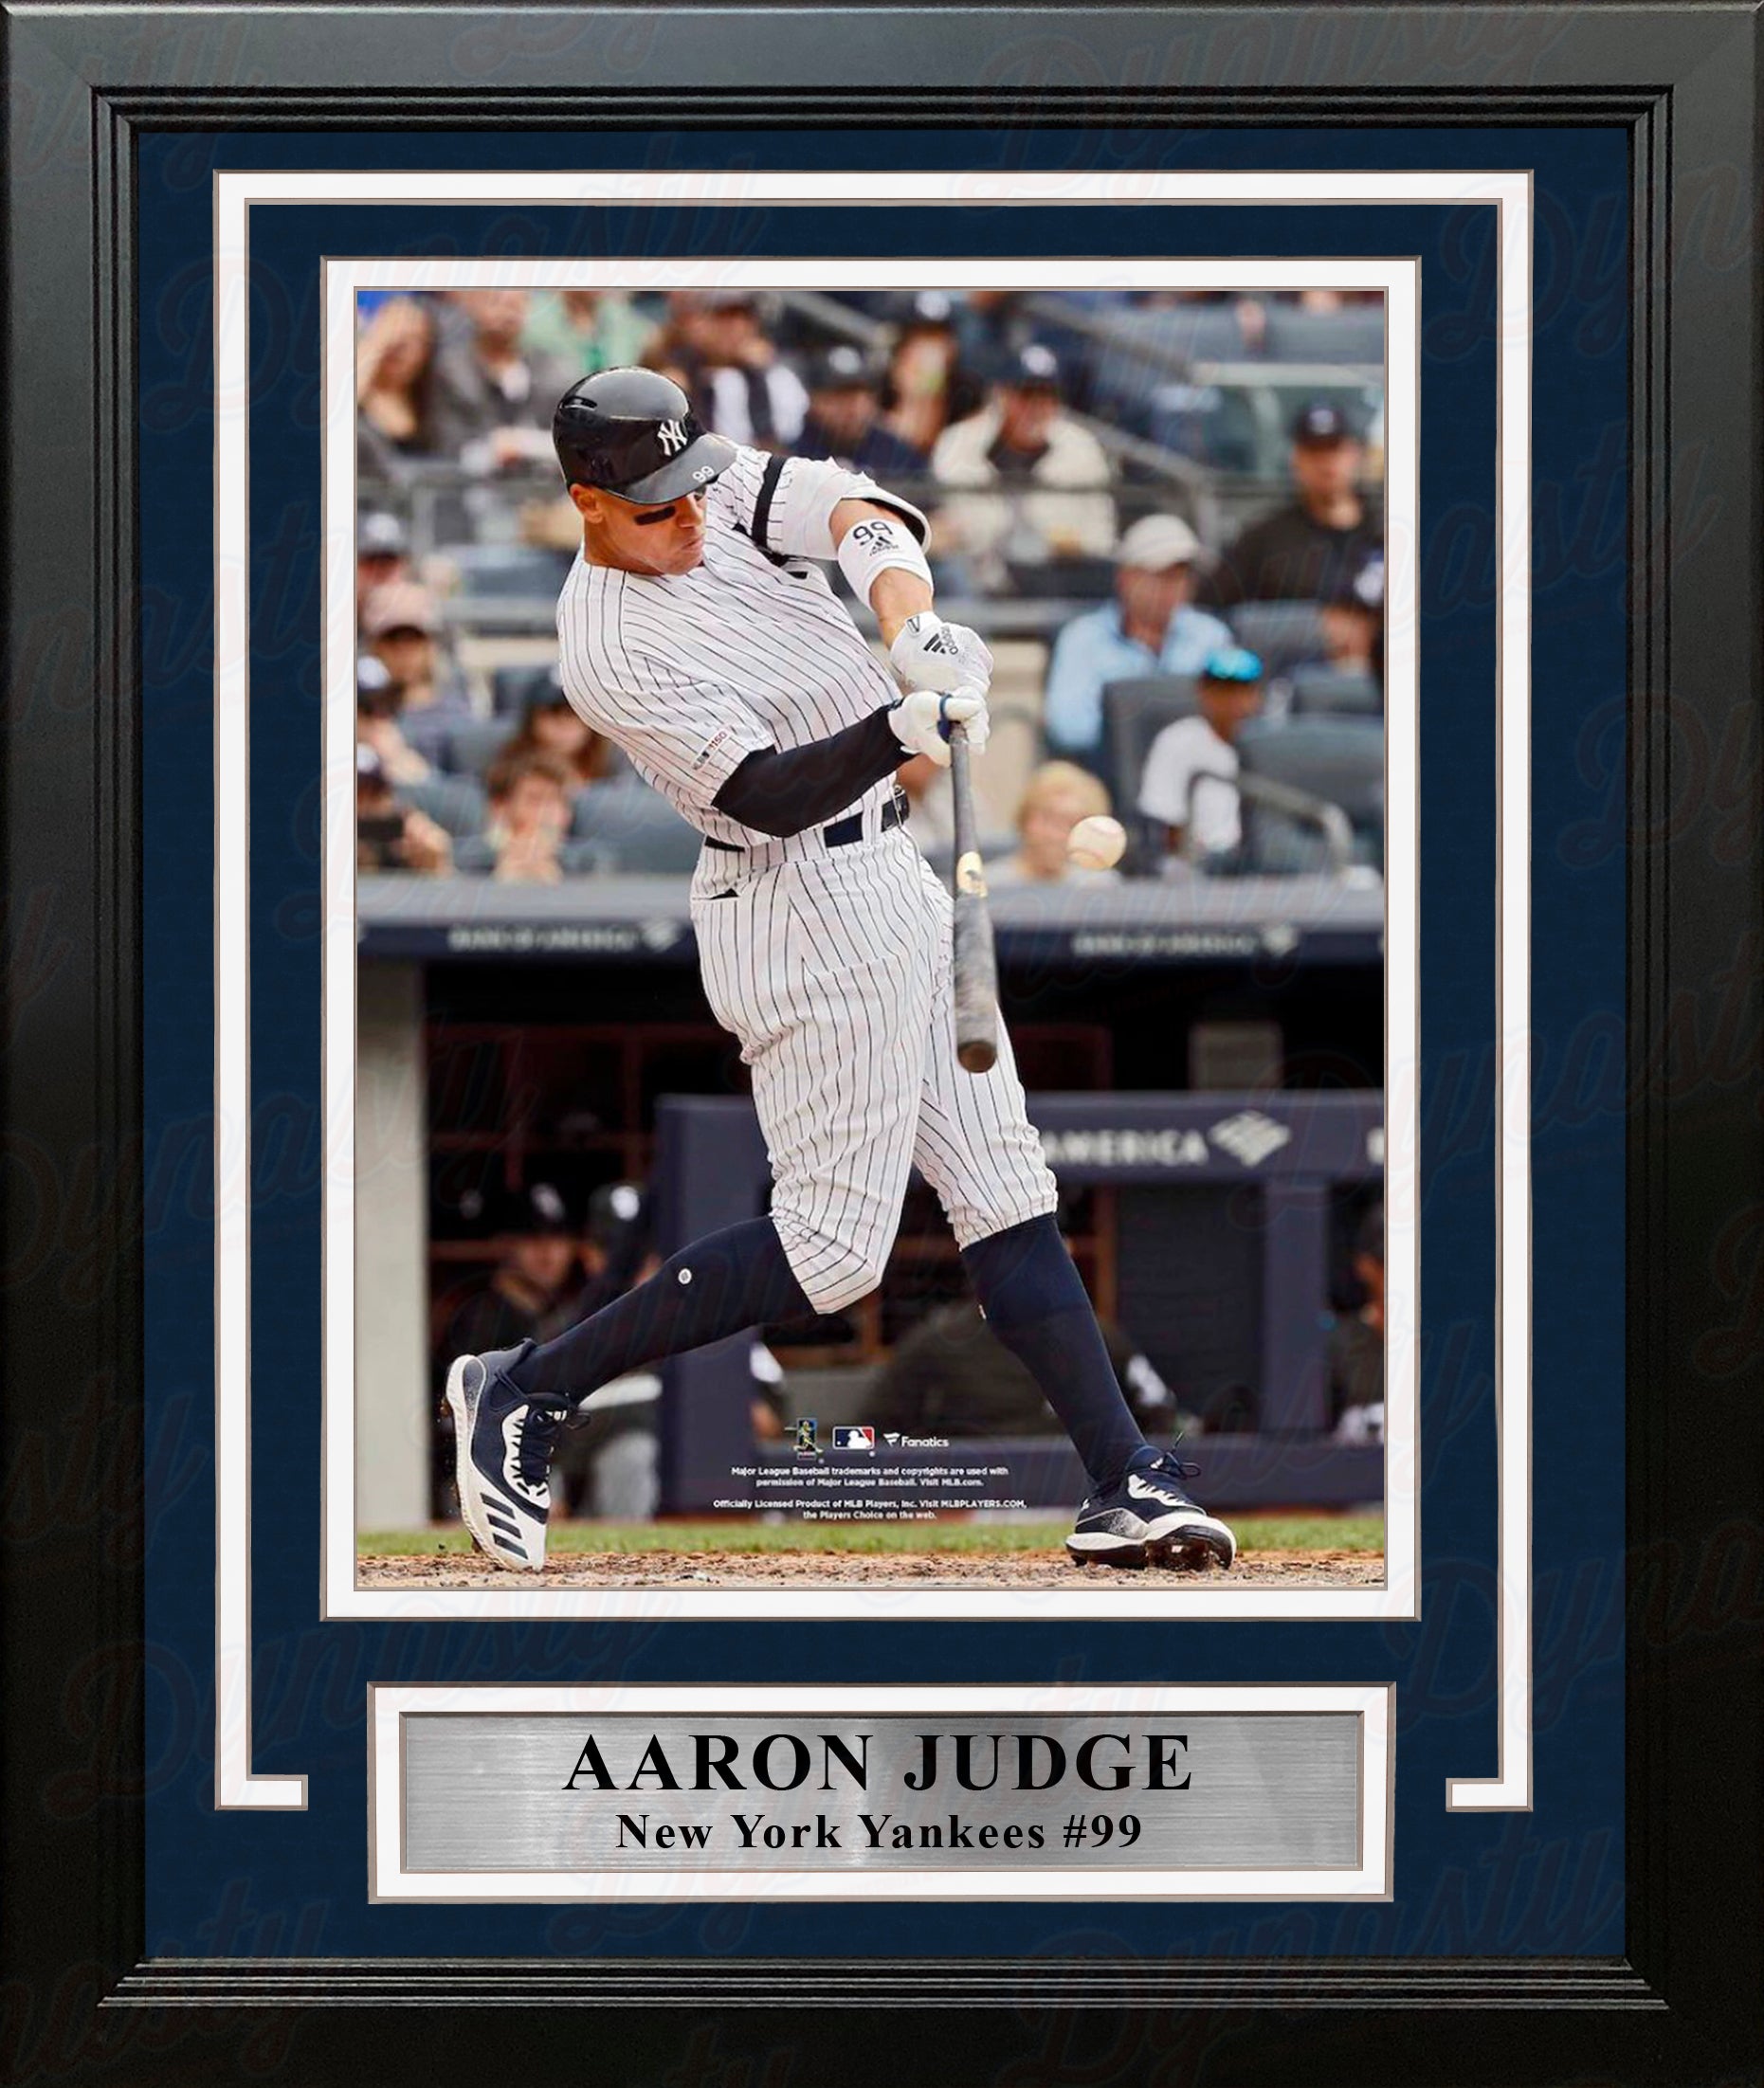 Aaron Judge in Action New York Yankees 8" x 10" Framed Baseball Photo - Dynasty Sports & Framing 